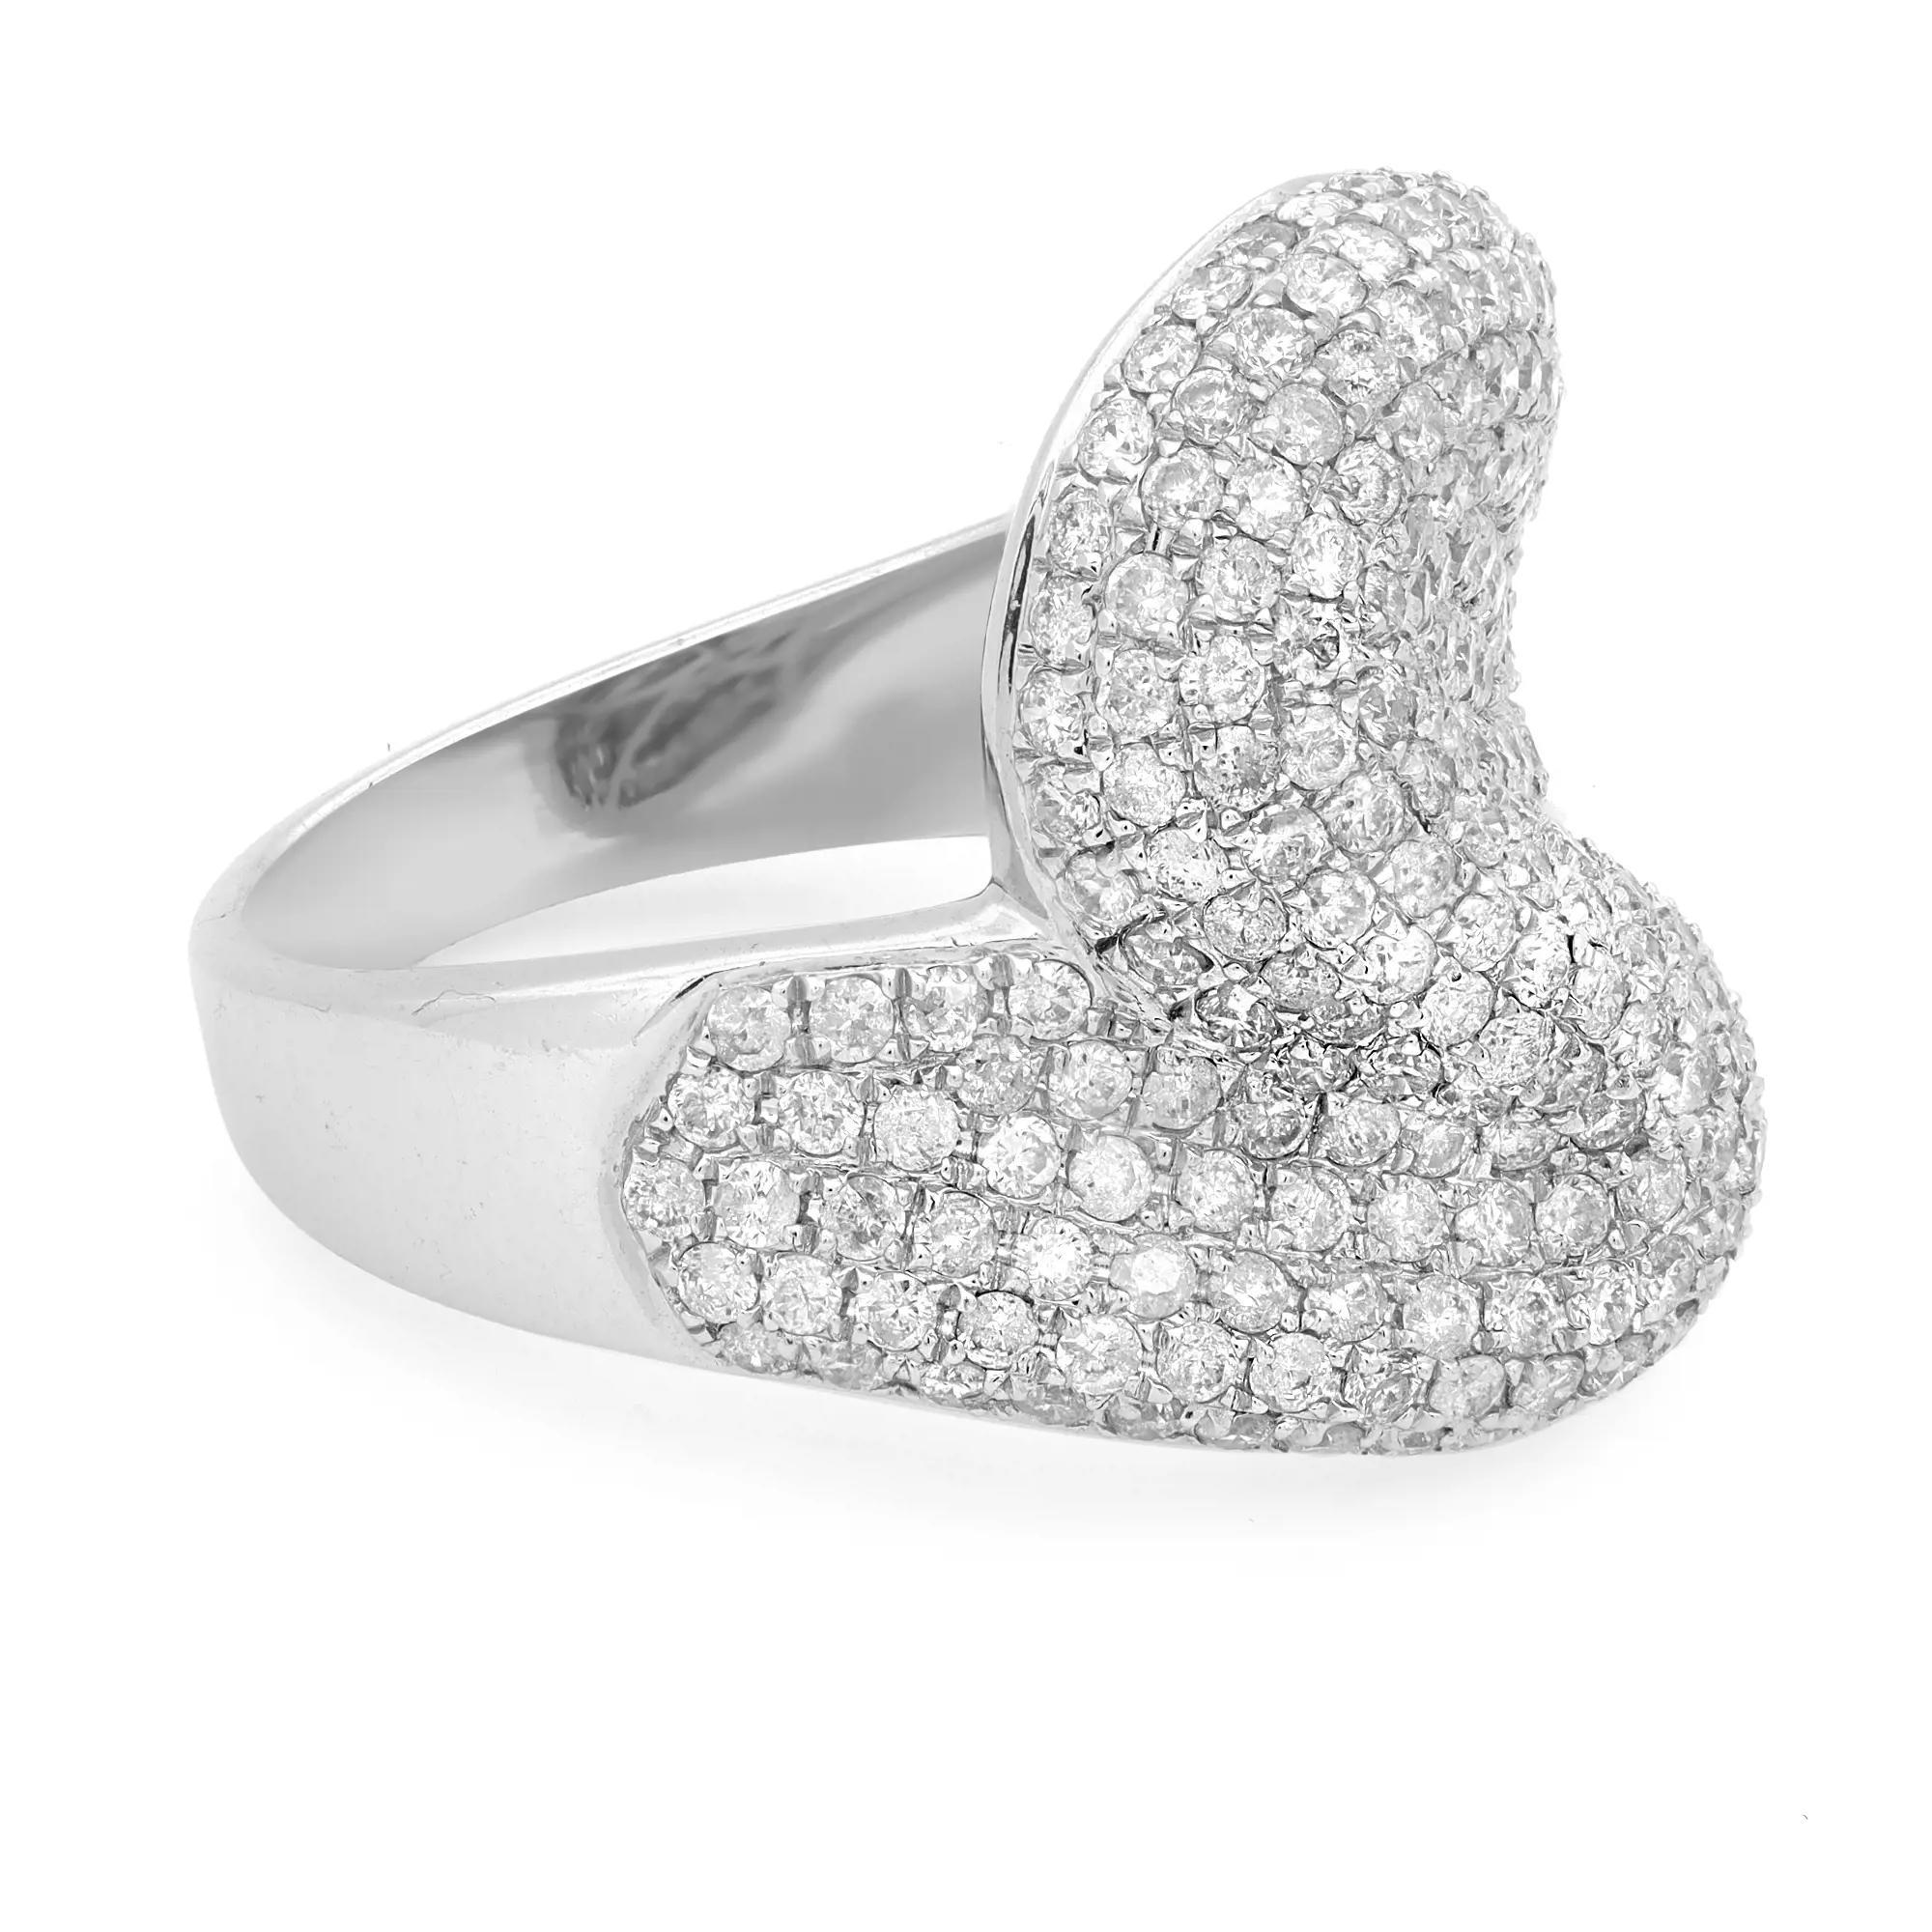 This luxurious ladies diamond cocktail ring showcases 2.14 carats of dazzling round cut diamonds in pave setting. Crafted in lustrous 14K white gold. Diamond quality: Color I and clarity SI1. Ring Size: 7.5. Total weight: 7.63 grams. A perfect